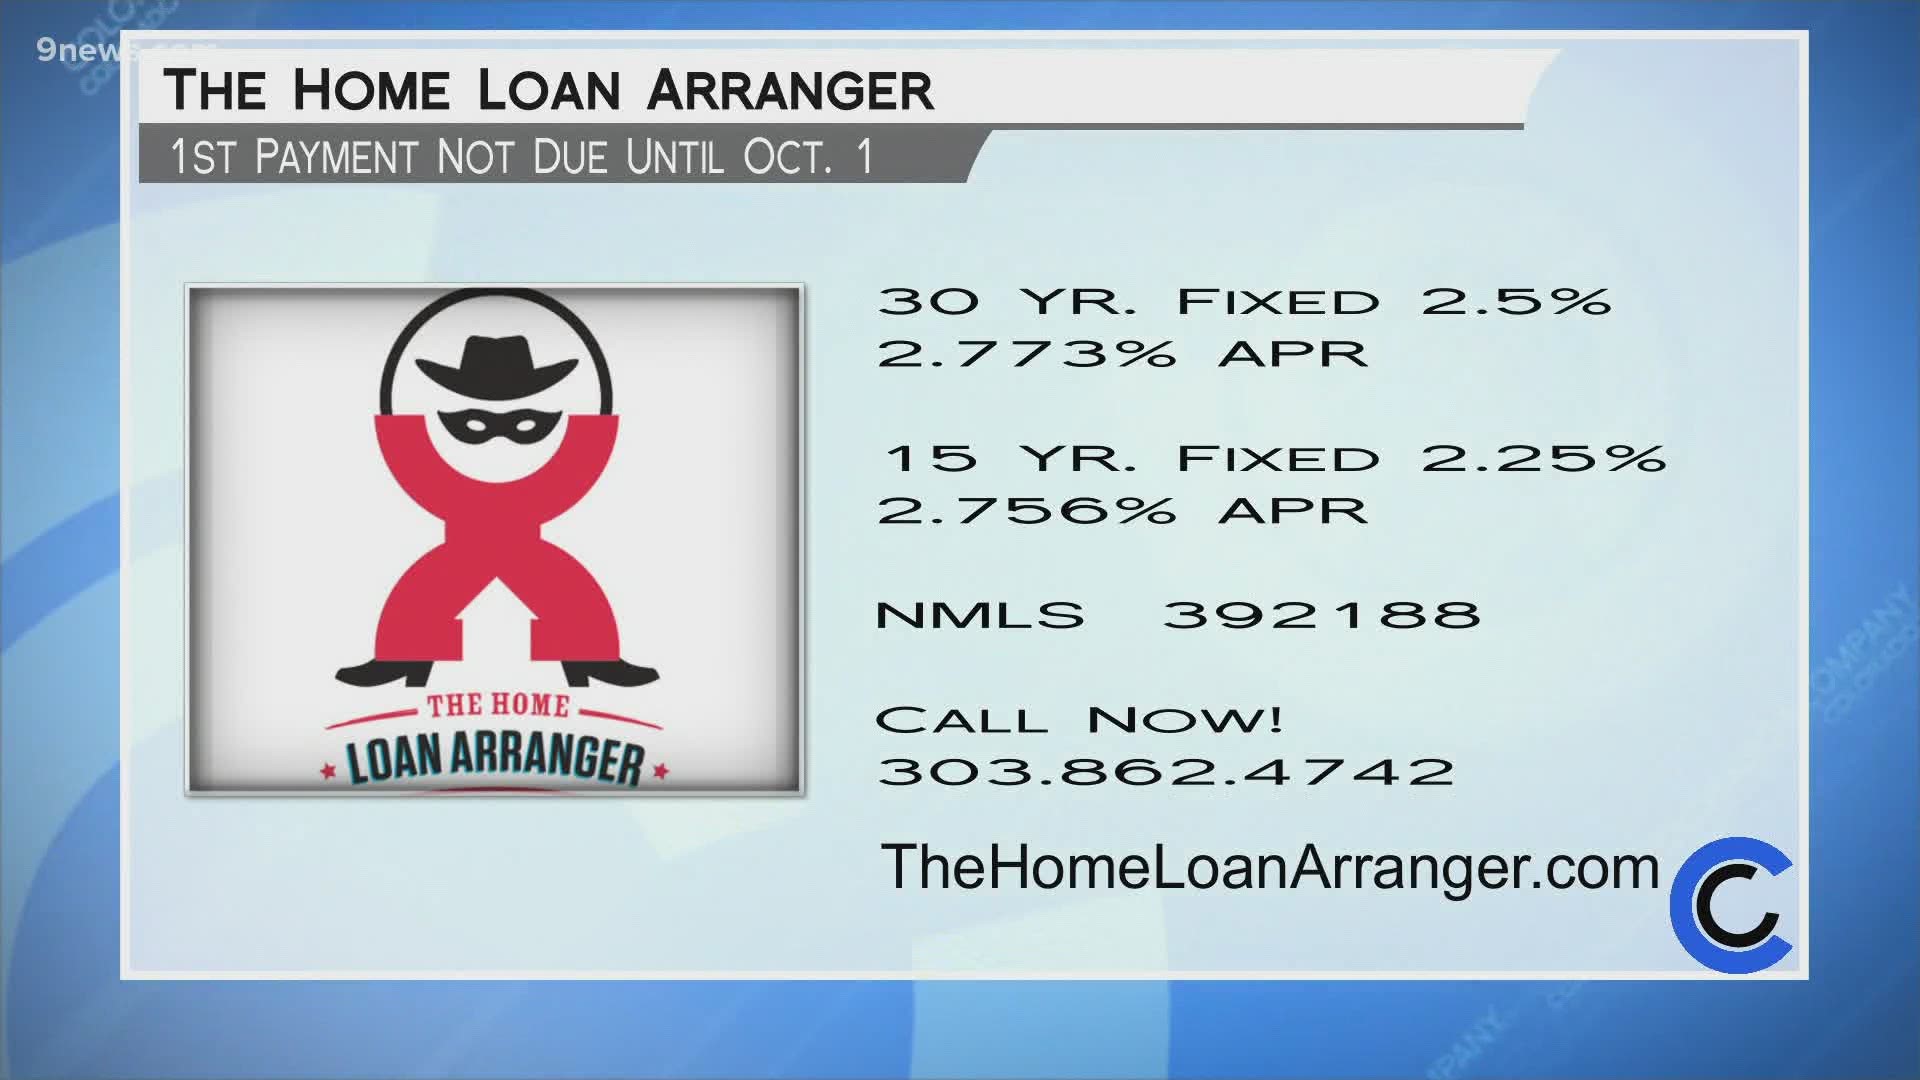 Call 303.862.4742 and start saving money today. Your first payment won't be due until October! Learn more at TheHomeLoanArranger.com.